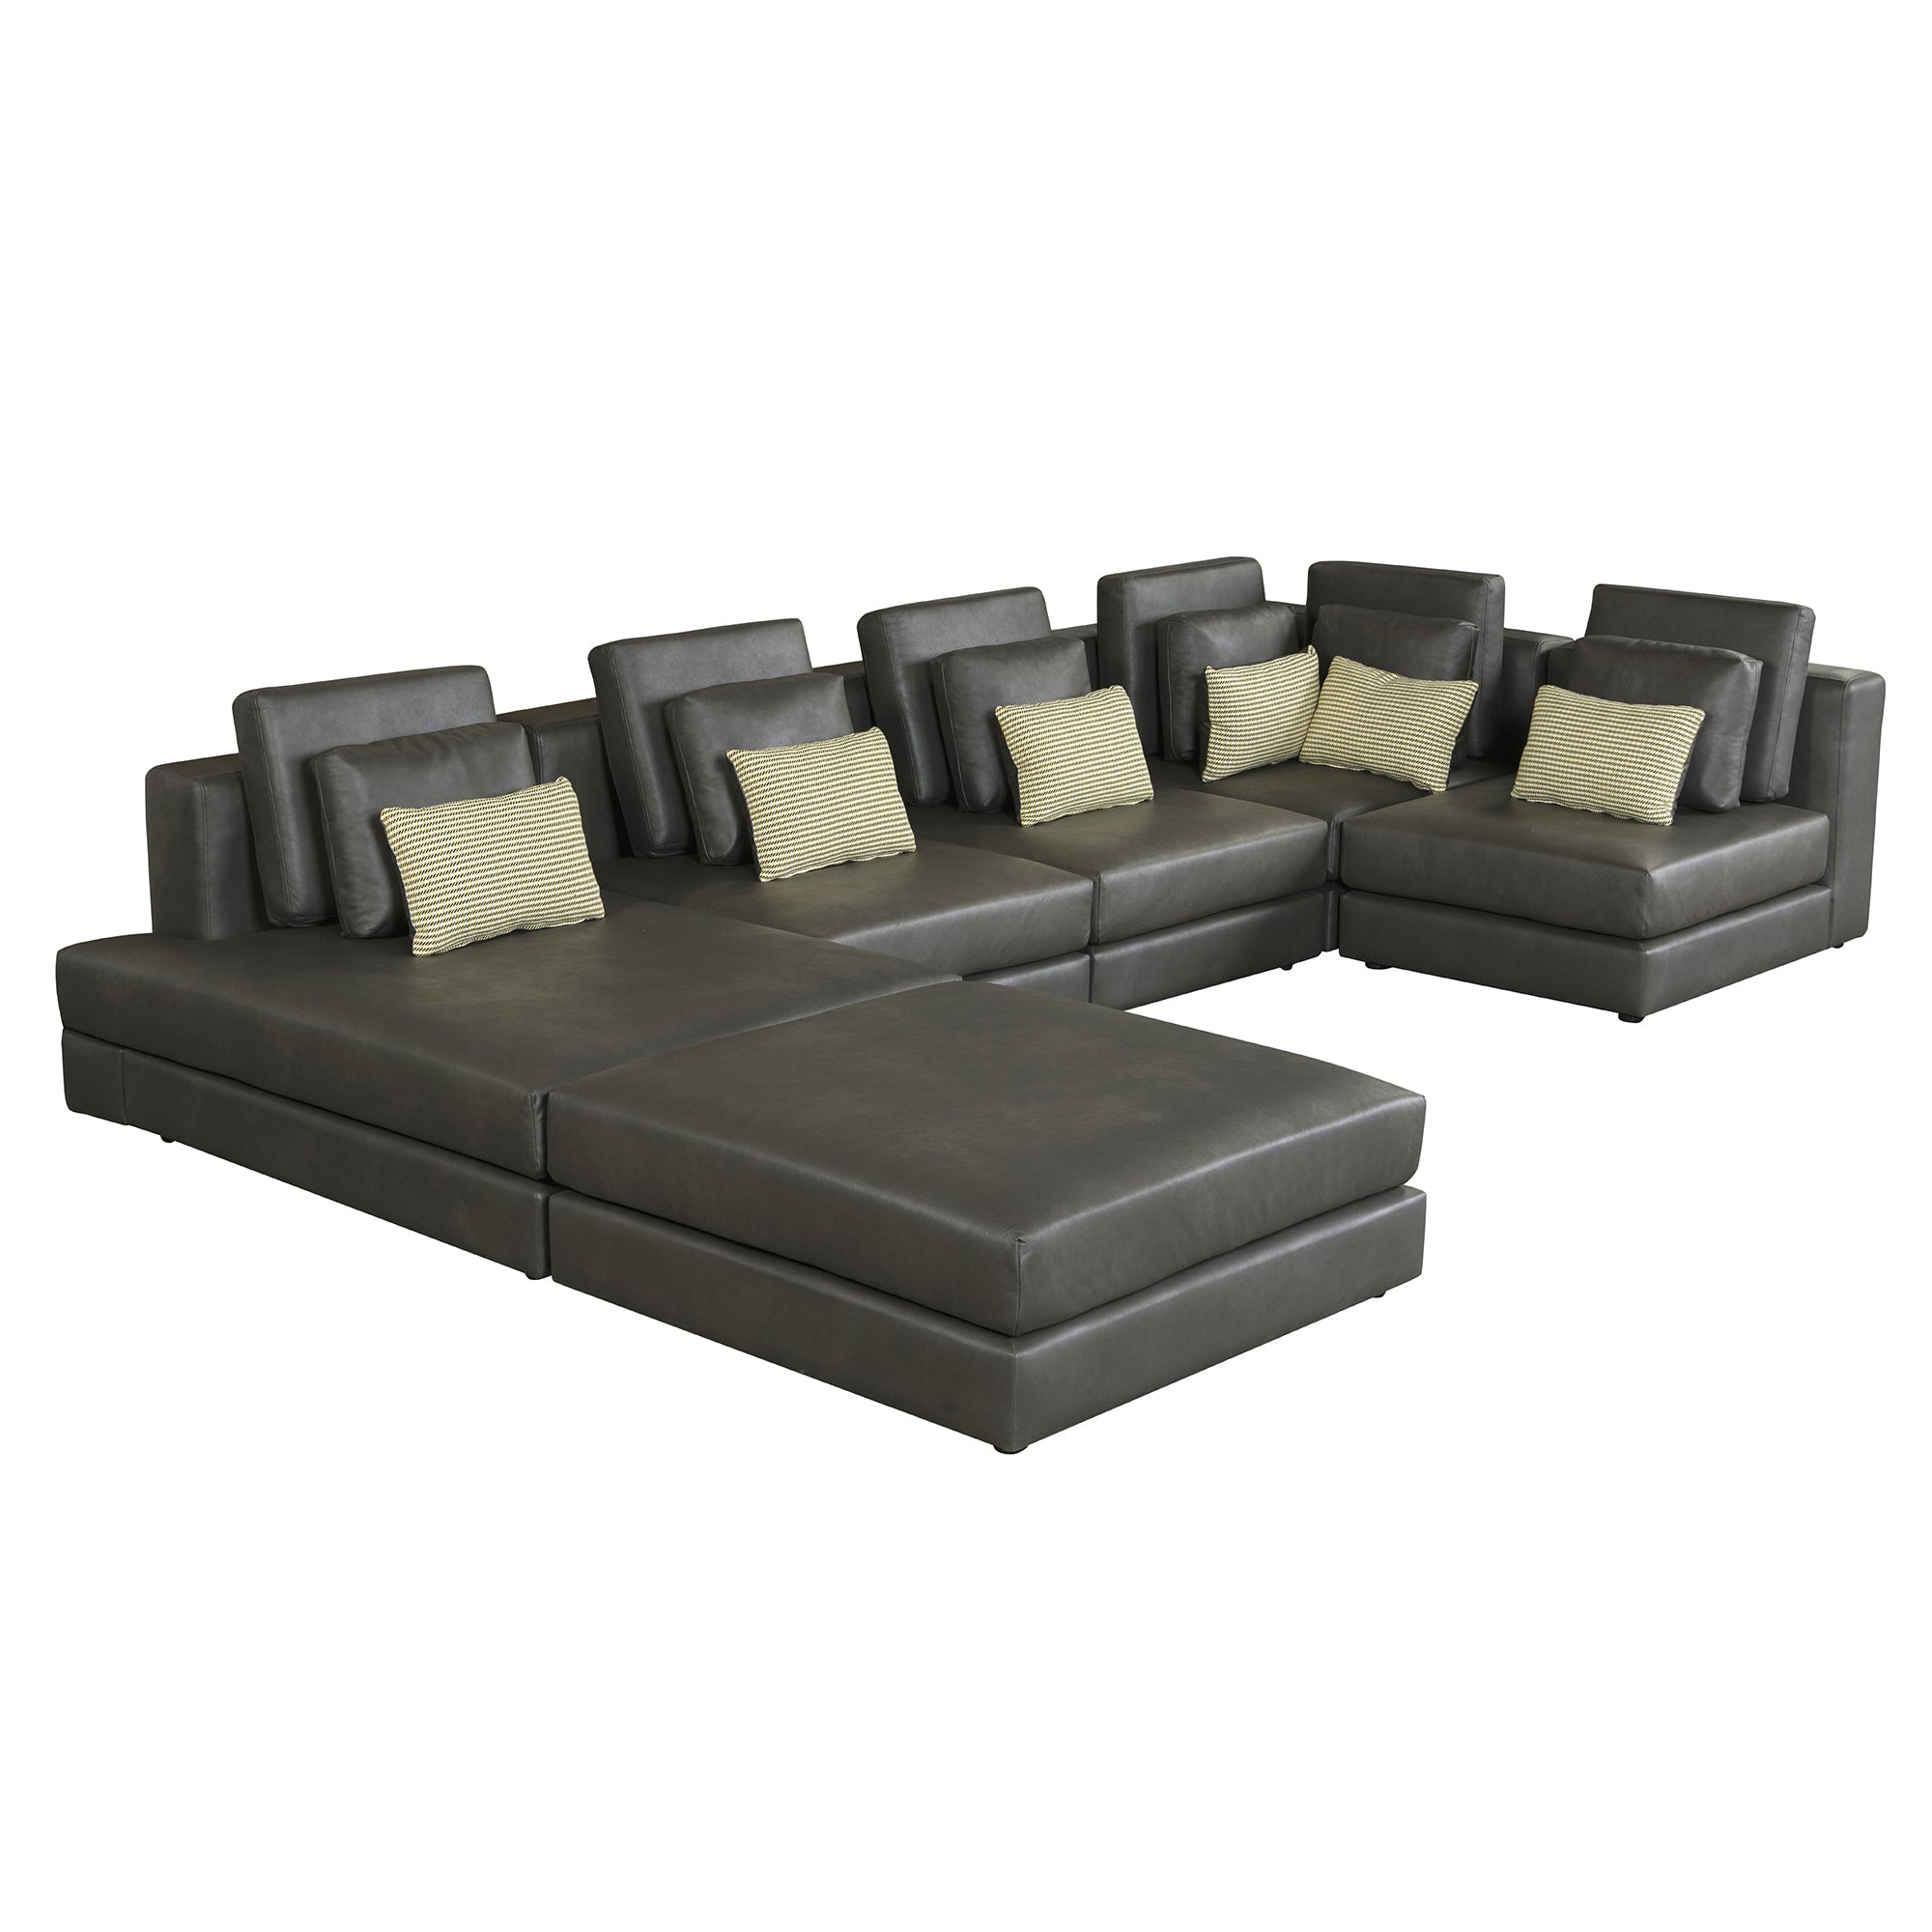 112.7" Modular Sectional Sofa with Ottoman | Black Corner Chaise Lounge-Stationary Sectionals-American Furniture Outlet